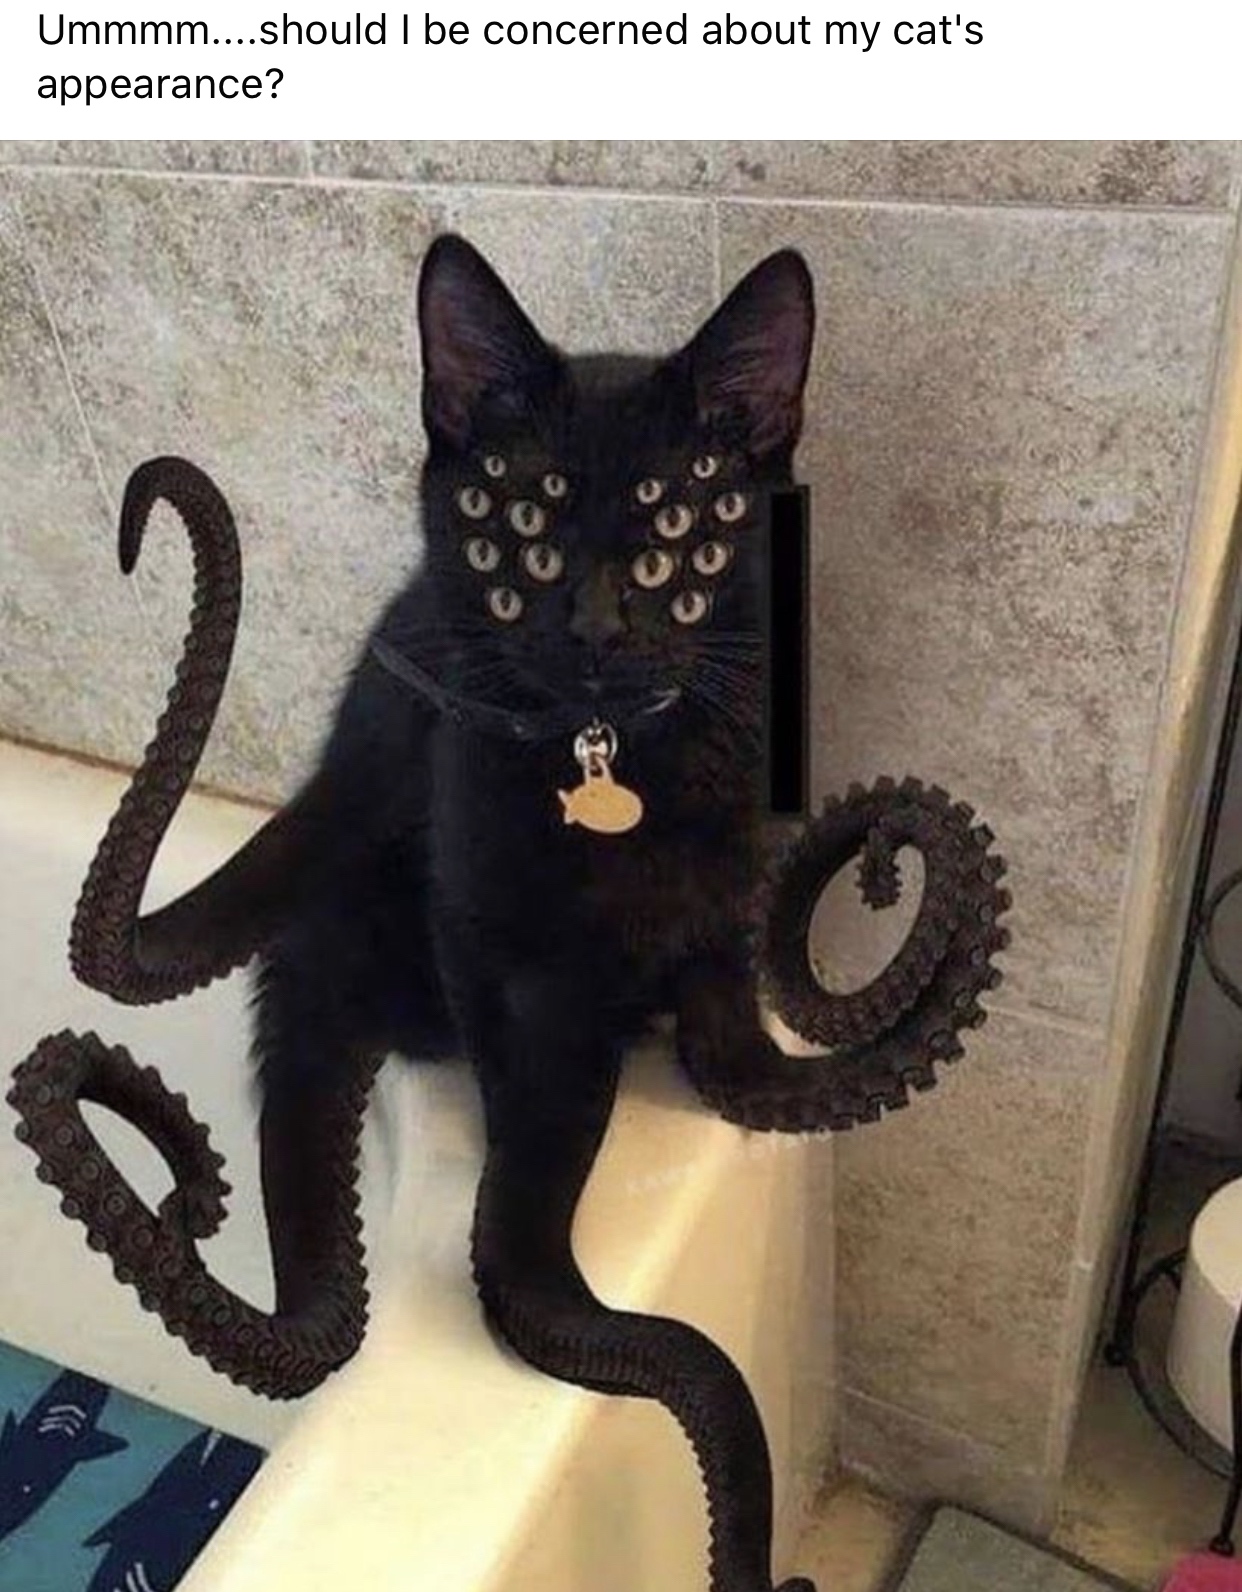 cthulhu cat - Ummmm....should I be concerned about my cat's appearance?